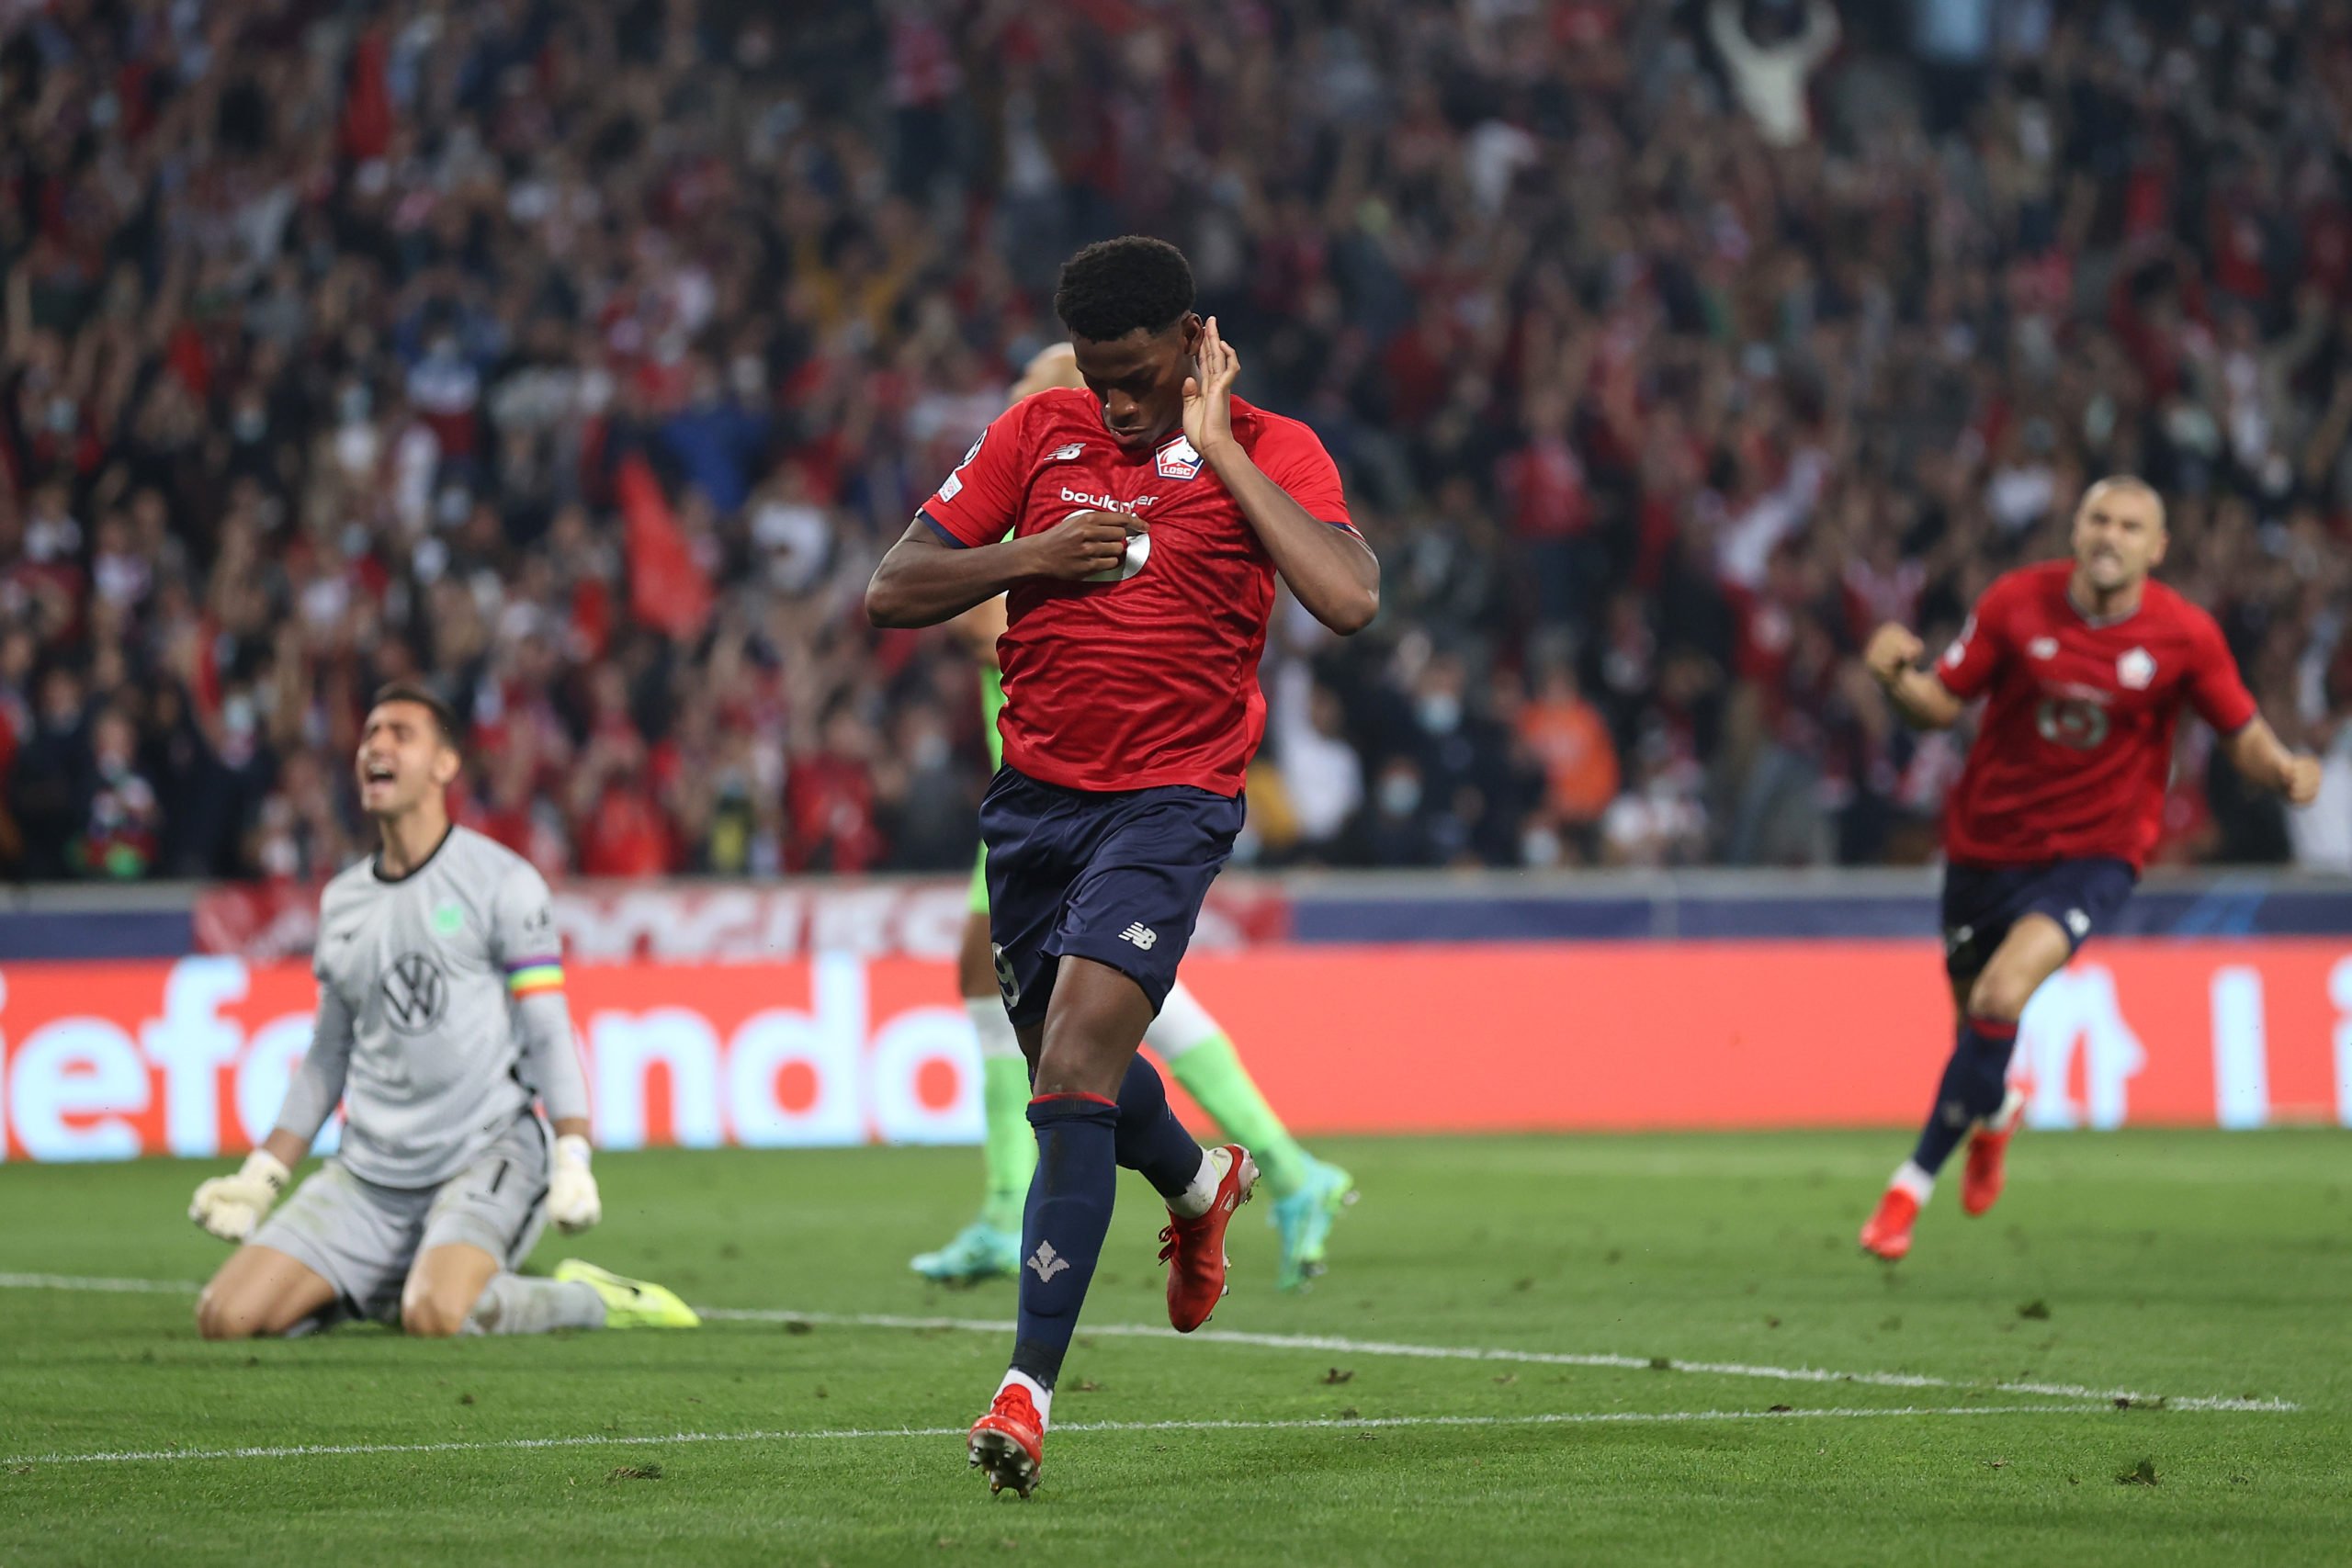 LILLE, FRANCE - SEPTEMBER 14: Jonathan David of Lille celebrates scoring a goal which is later disallowed by VAR during the UEFA Champions League group G match between Lille OSC and VfL Wolfsburg at Stade Pierre-Mauroy on September 14, 2021 in Lille, France. (Photo by Lars Baron/Getty Images)The 4th Official uses images provided by the following image agency: Getty Images (https://www.gettyimages.de/) and Imago Images (https://www.imago-images.de/)